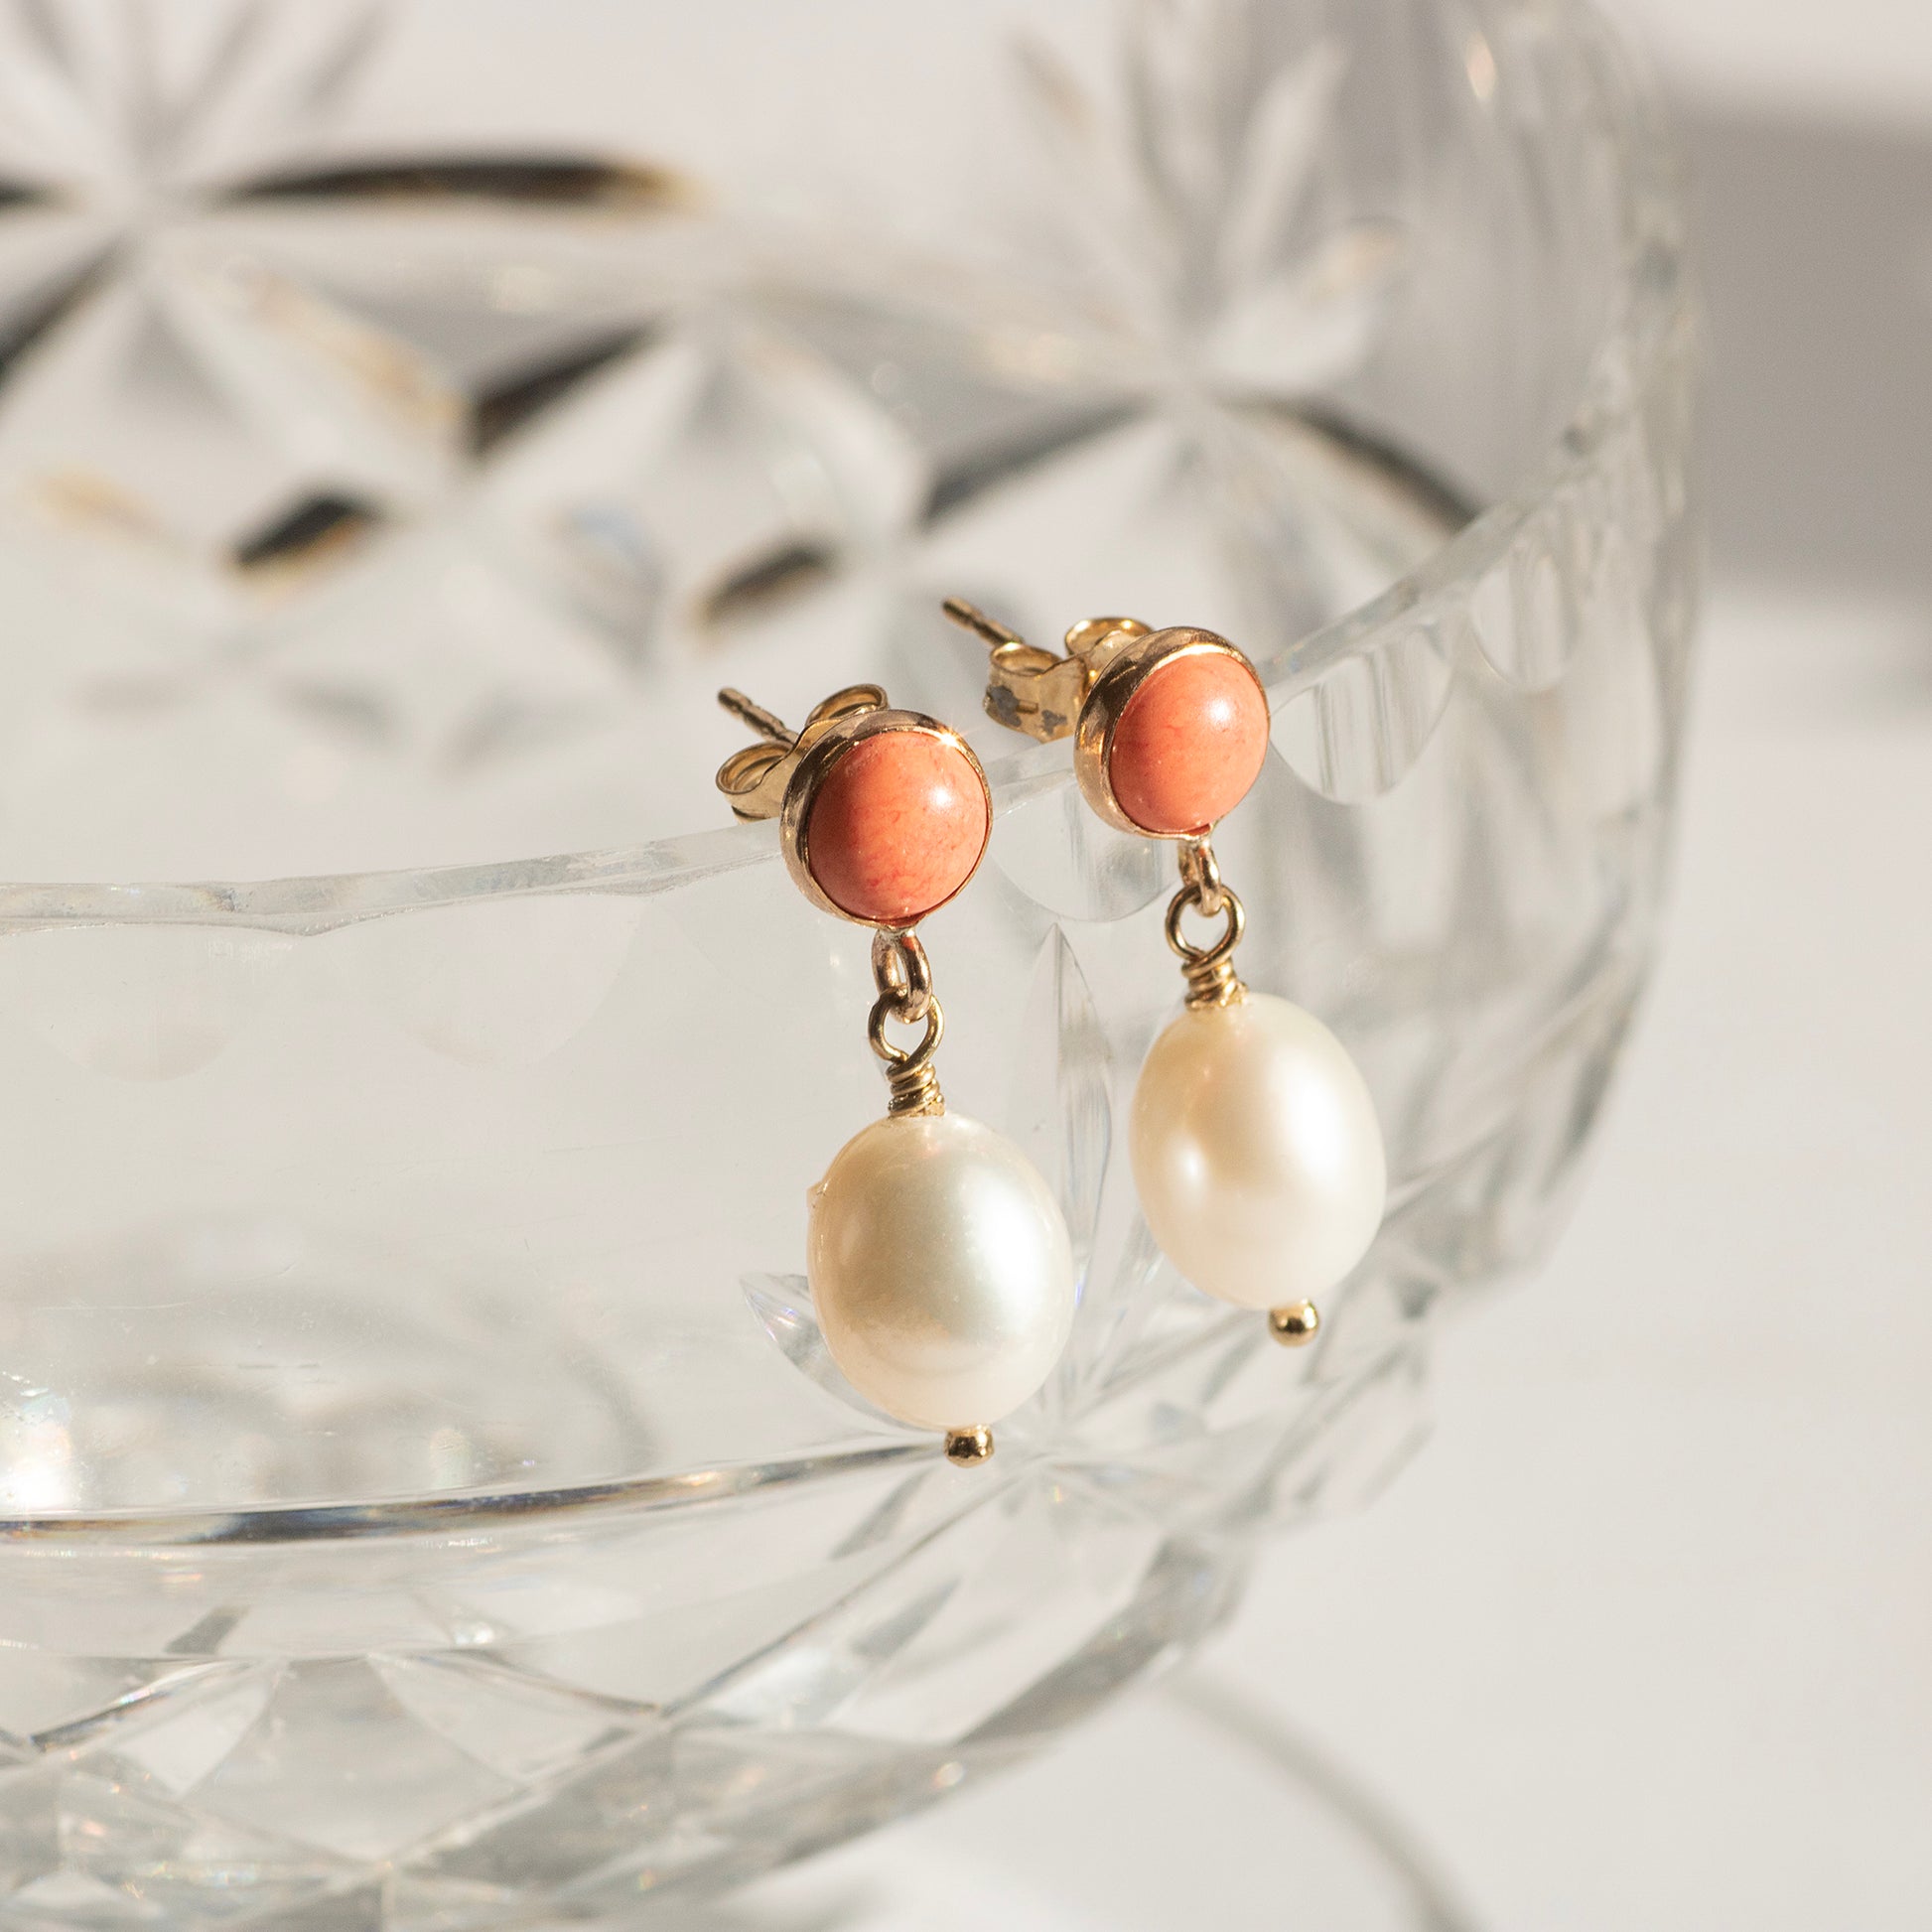 35th Wedding Anniversary Gift - Coral Anniversary Earrings - Silver & Gold